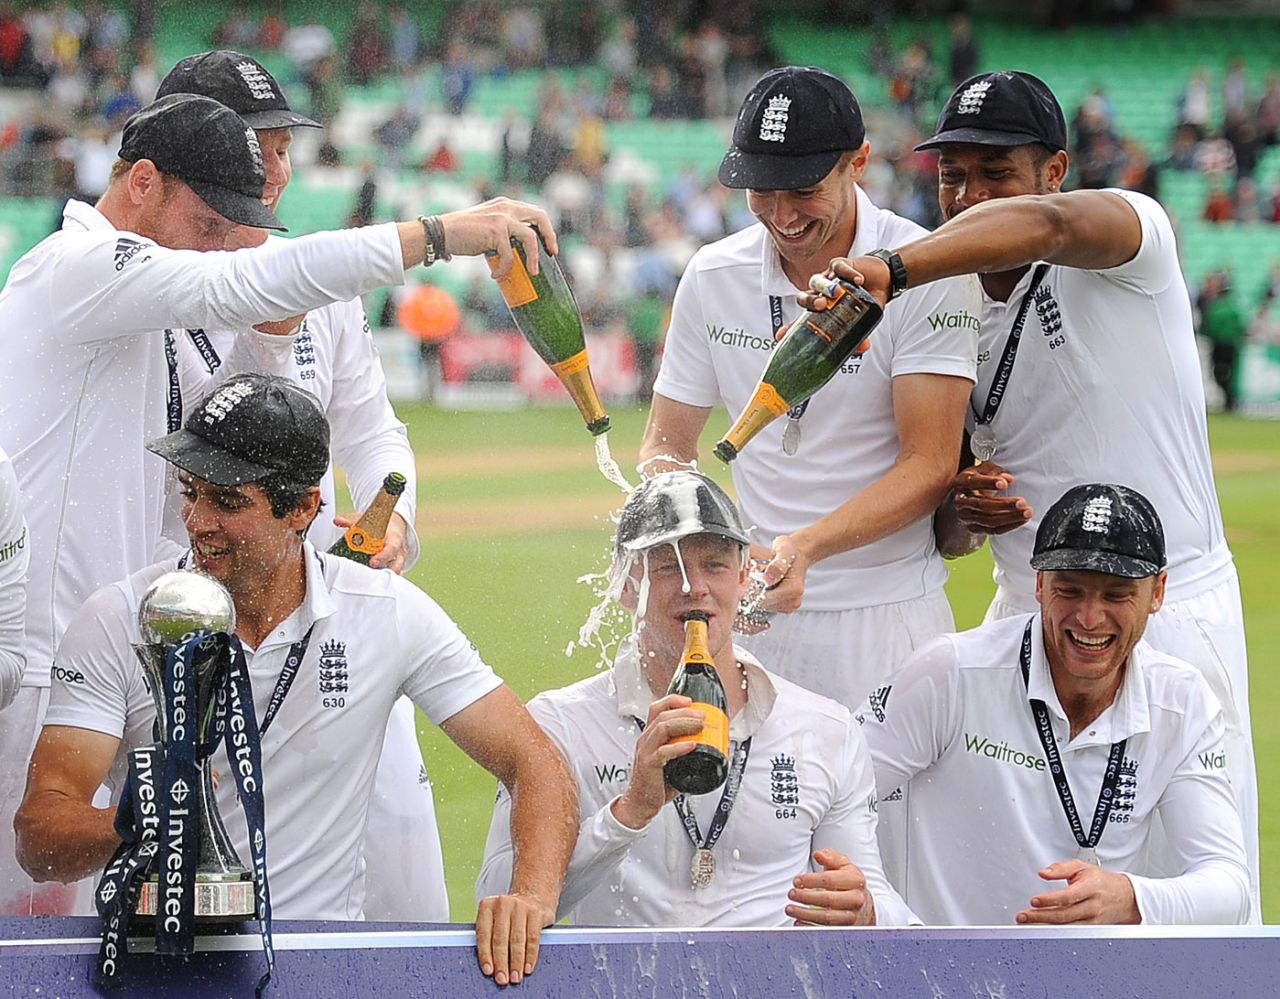 Sam Robson has champagne poured over him by his team-mates, England v India, 5th Investec Test, The Oval, 3rd day, August 17, 2014